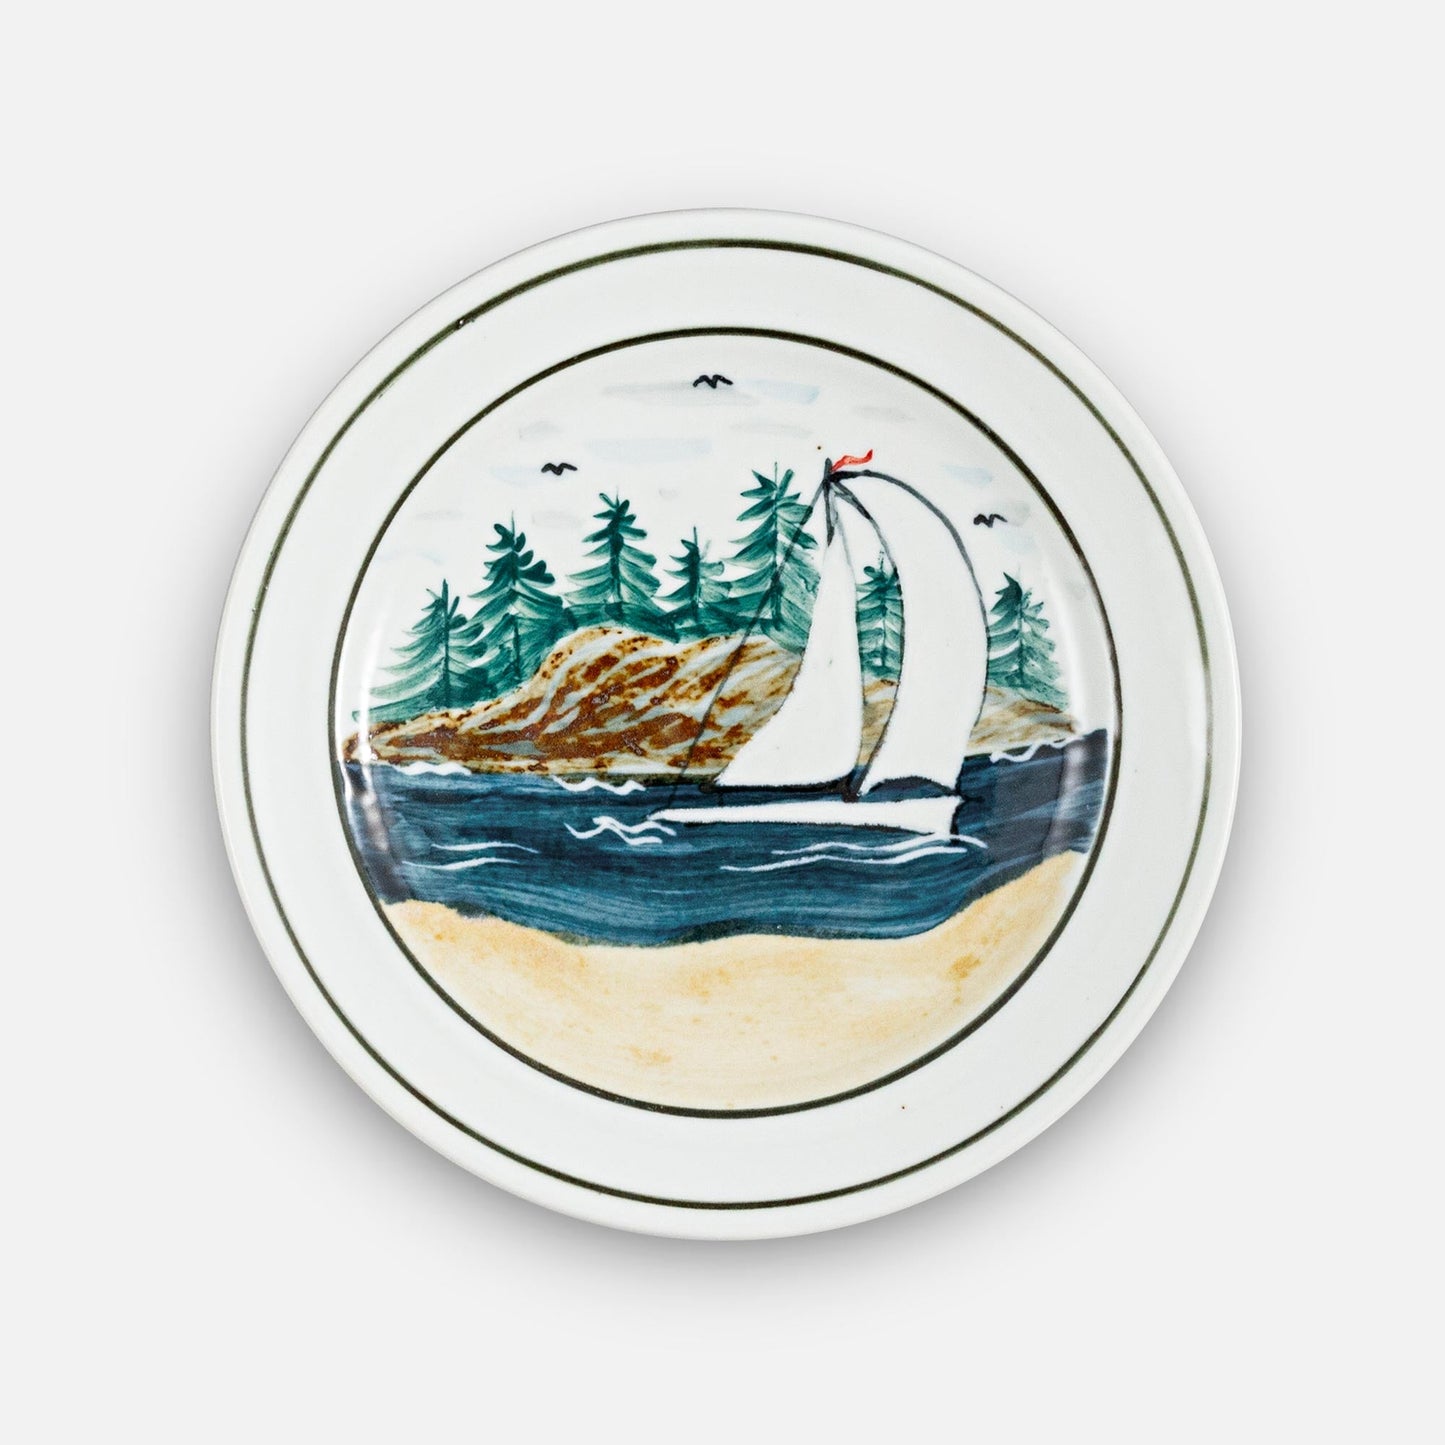 Handmade Pottery Rimless Dinner Plate made by Georgetown Pottery in Maine in Sailboat Pattern